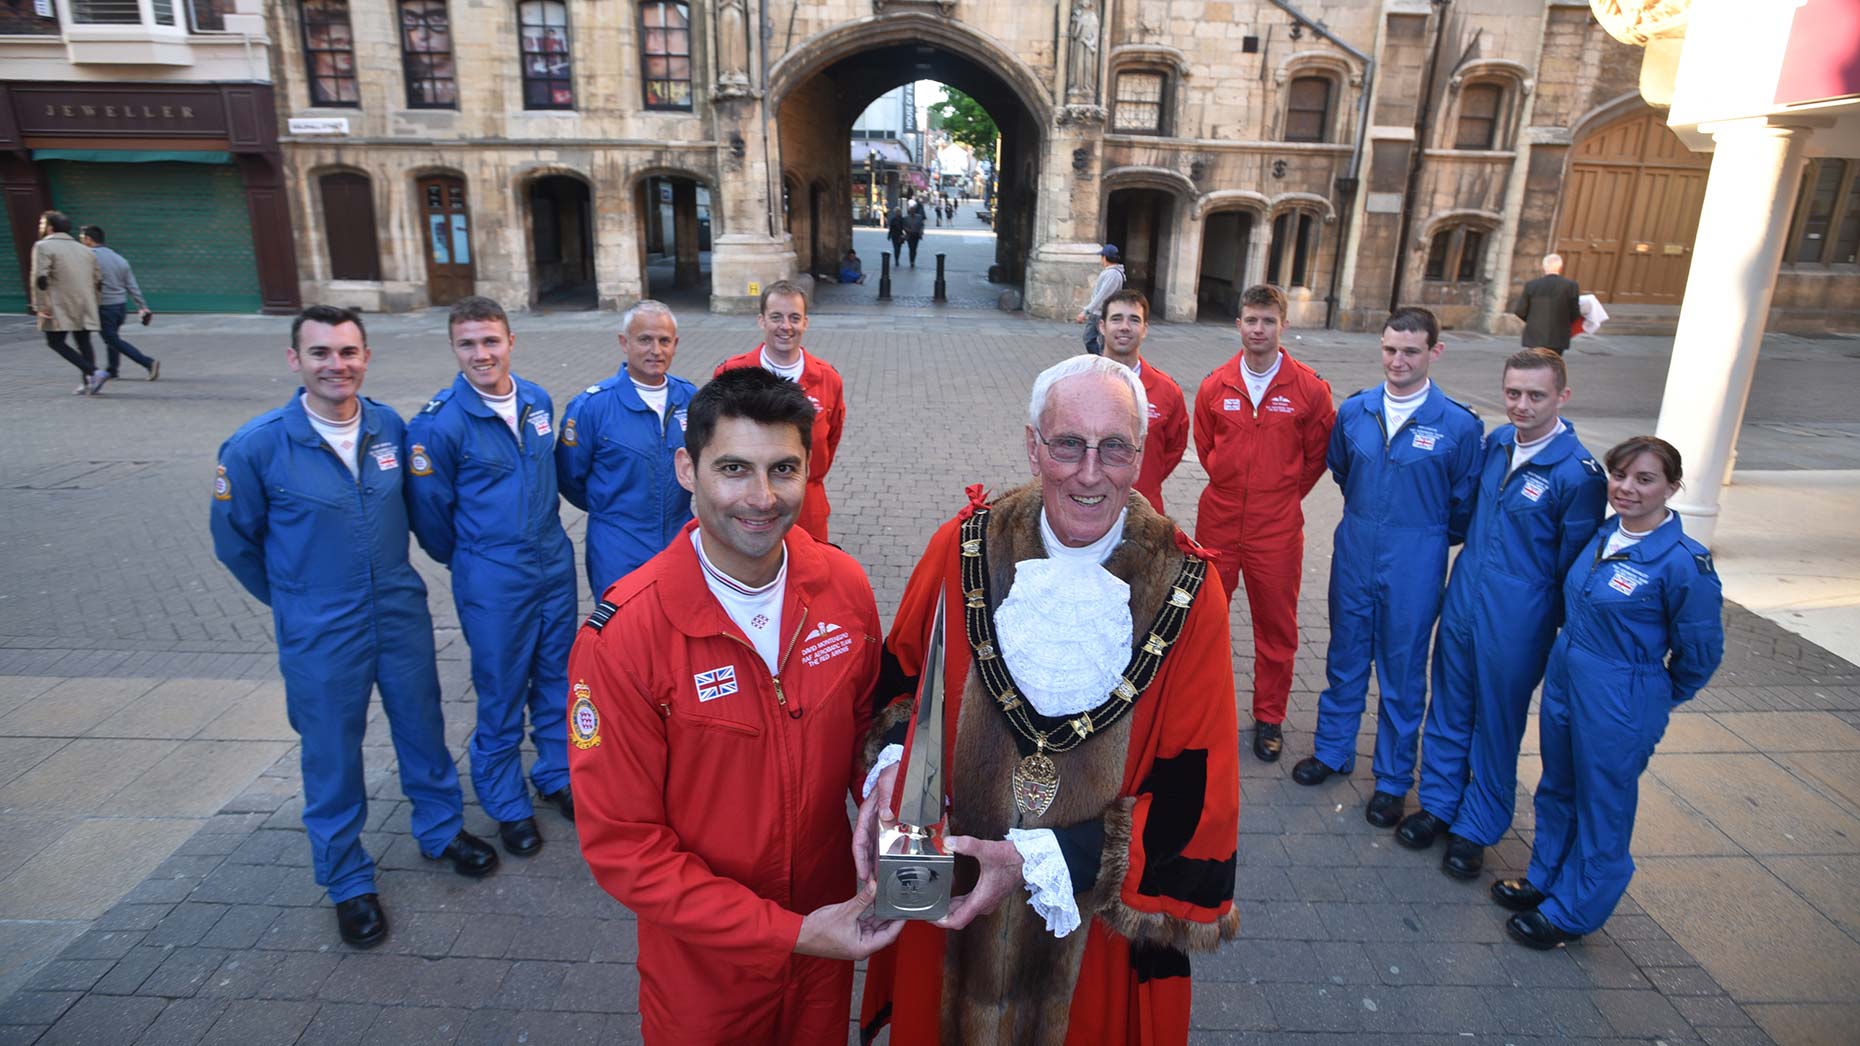 The Red Arrows with Mayor of Lincoln Councillor Brent Charlesworth. Photo: Steve Smailes for The Lincolnite